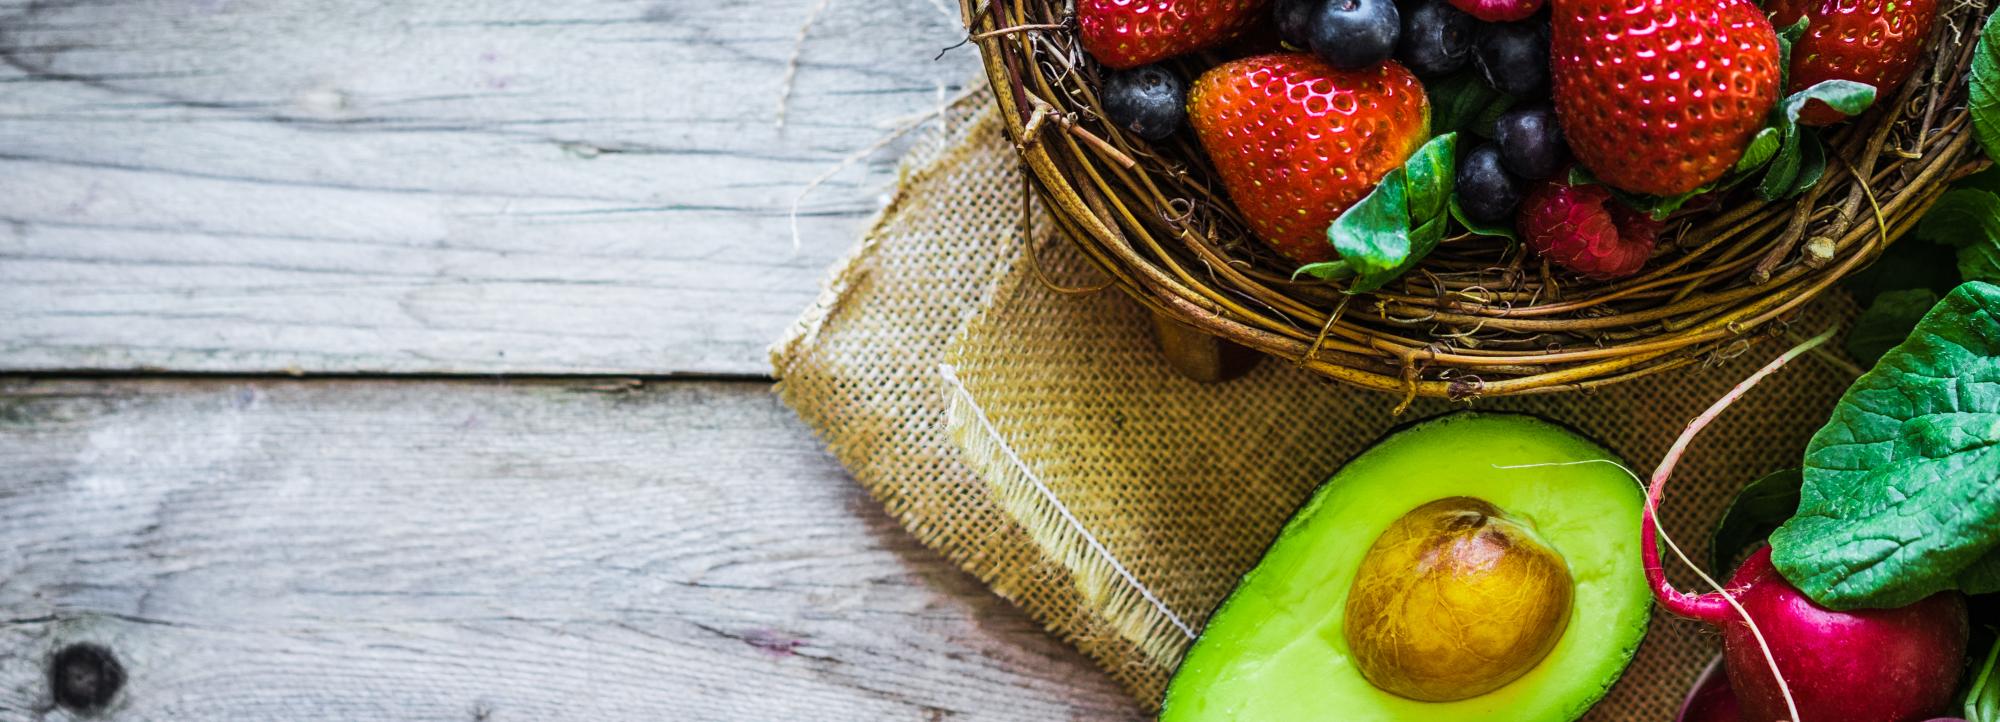 Close-up of a basket with berries, half an avocado, and a bunch of radishes on a wooden table.